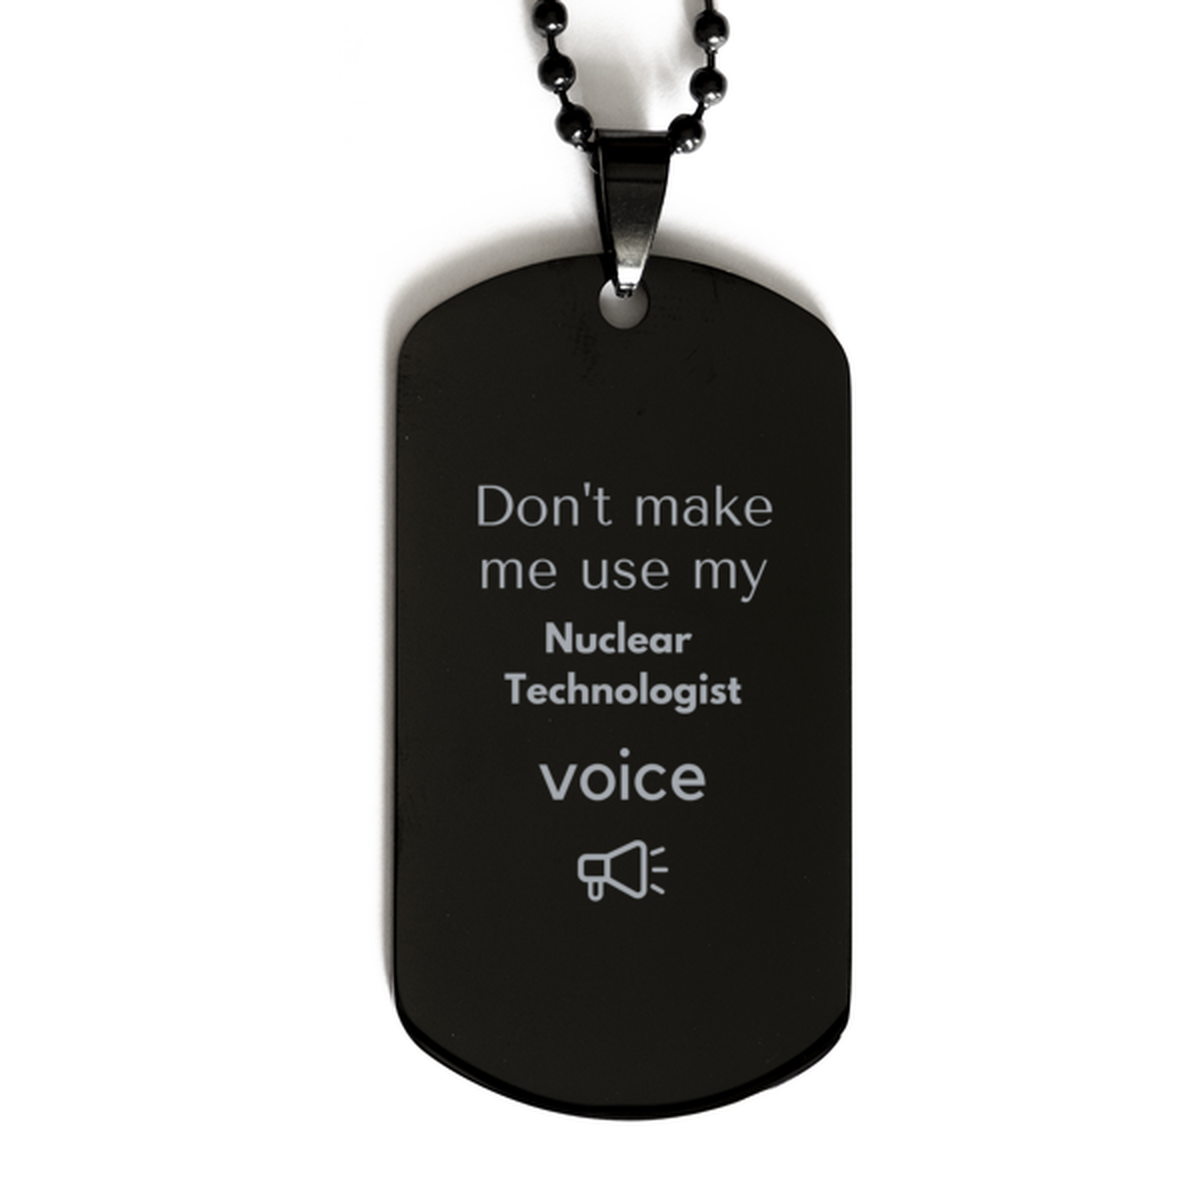 Don't make me use my Nuclear Technologist voice, Sarcasm Nuclear Technologist Gifts, Christmas Nuclear Technologist Black Dog Tag Birthday Unique Gifts For Nuclear Technologist Coworkers, Men, Women, Colleague, Friends